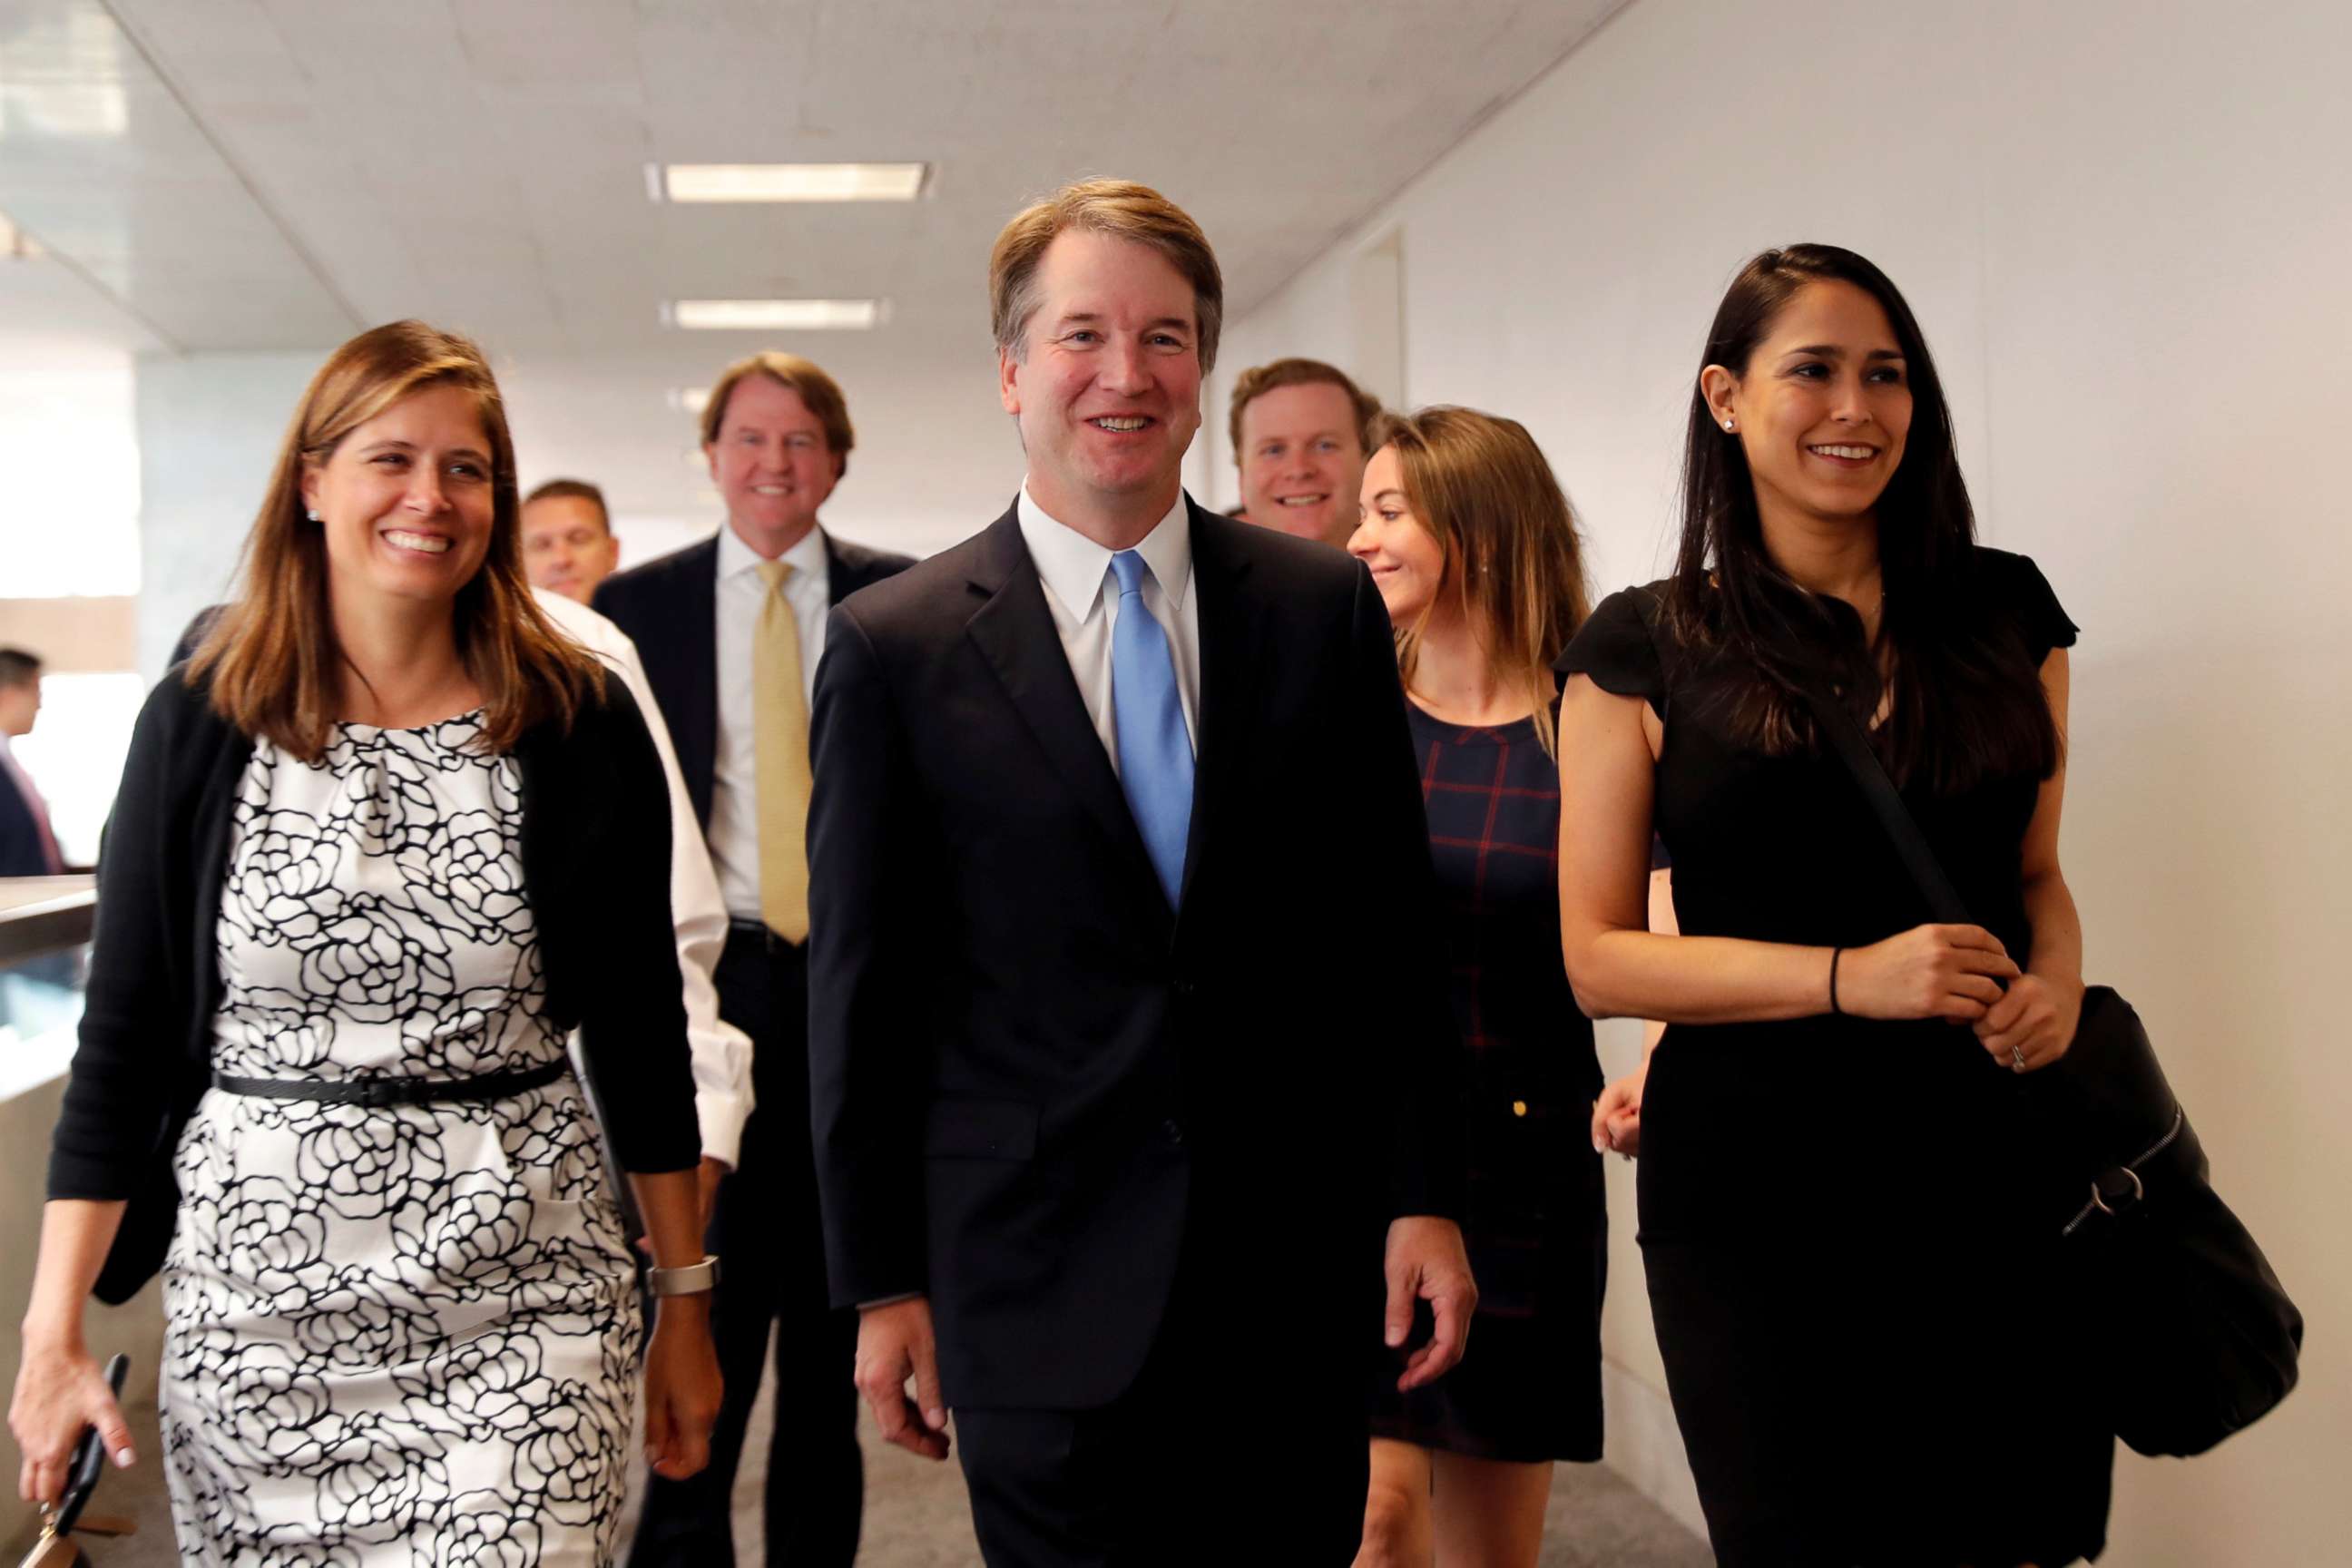 PHOTO: Supreme Court nominee Judge Brett Kavanaugh arrives for a meeting with Senator Joe Donnelly at Donnelly's office on Capitol Hill in Washington, August 15, 2018.